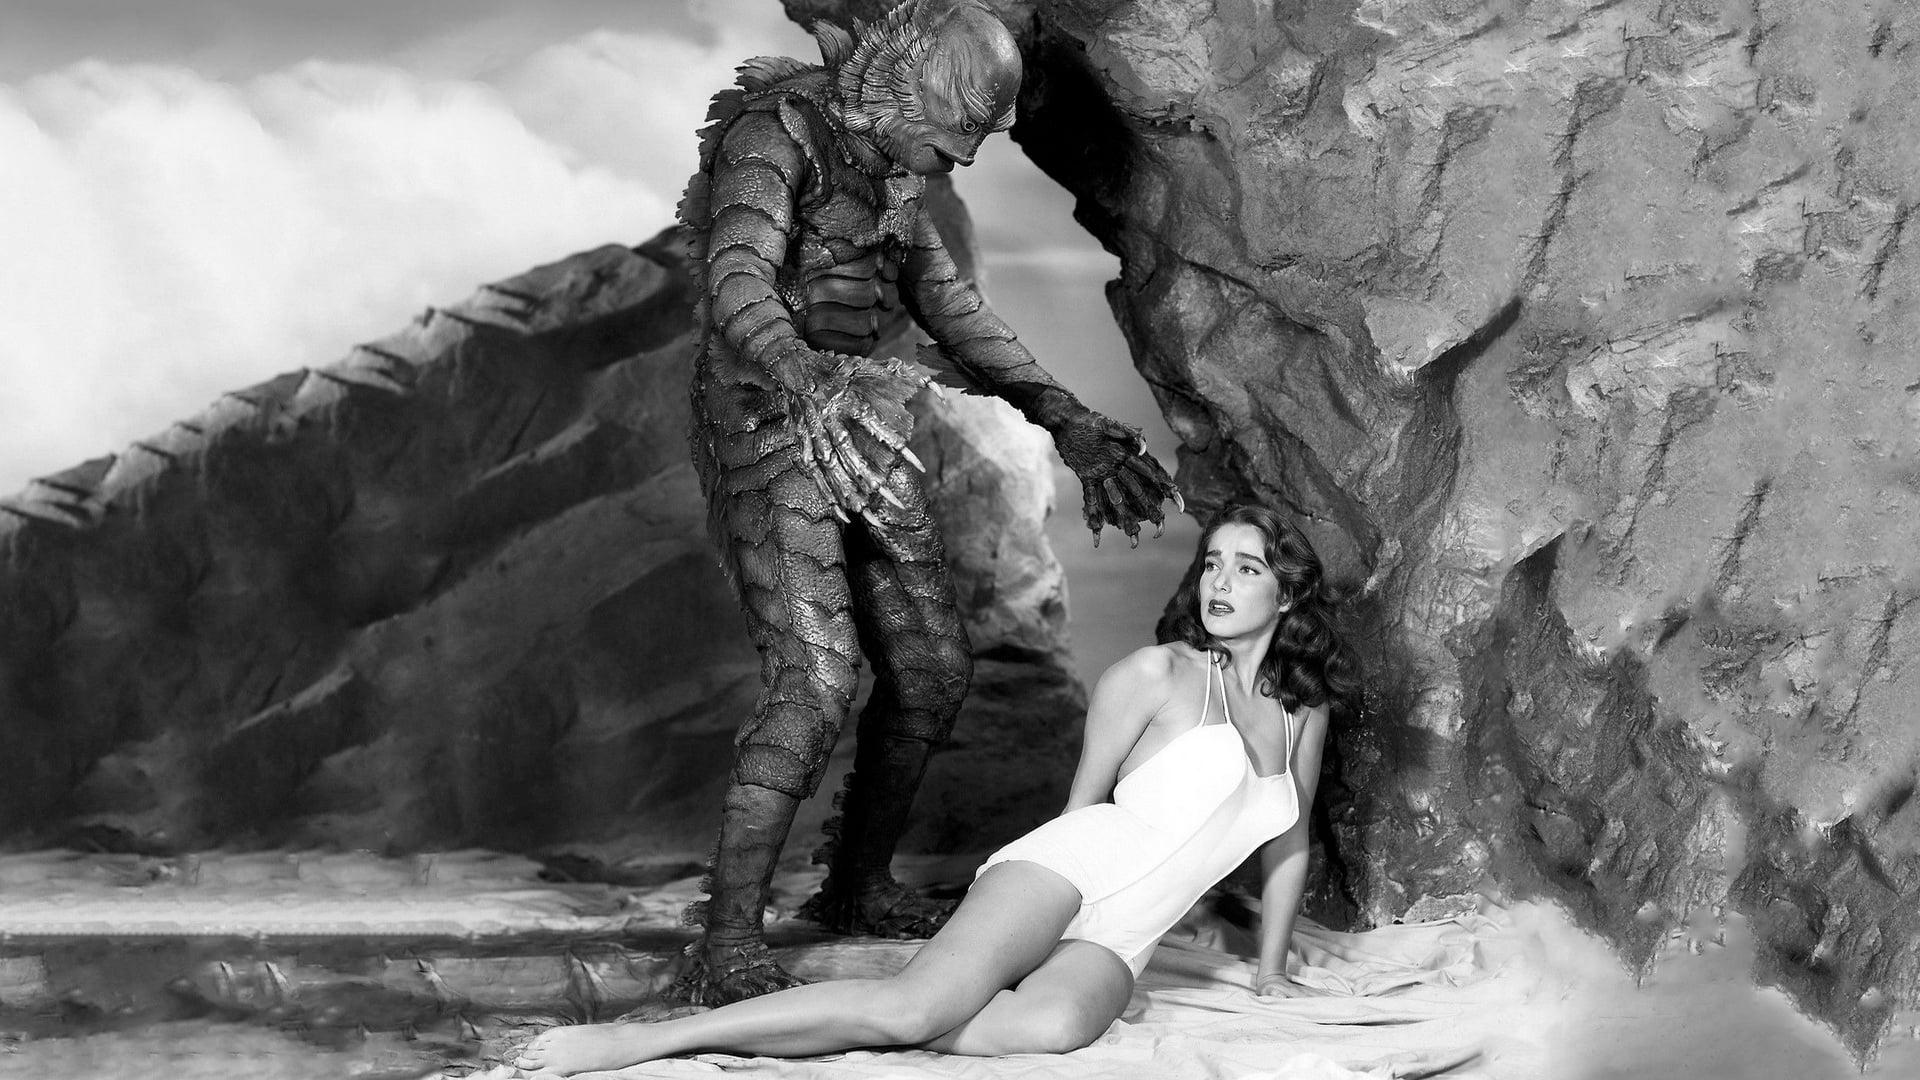 Creature from the Black Lagoon backdrop